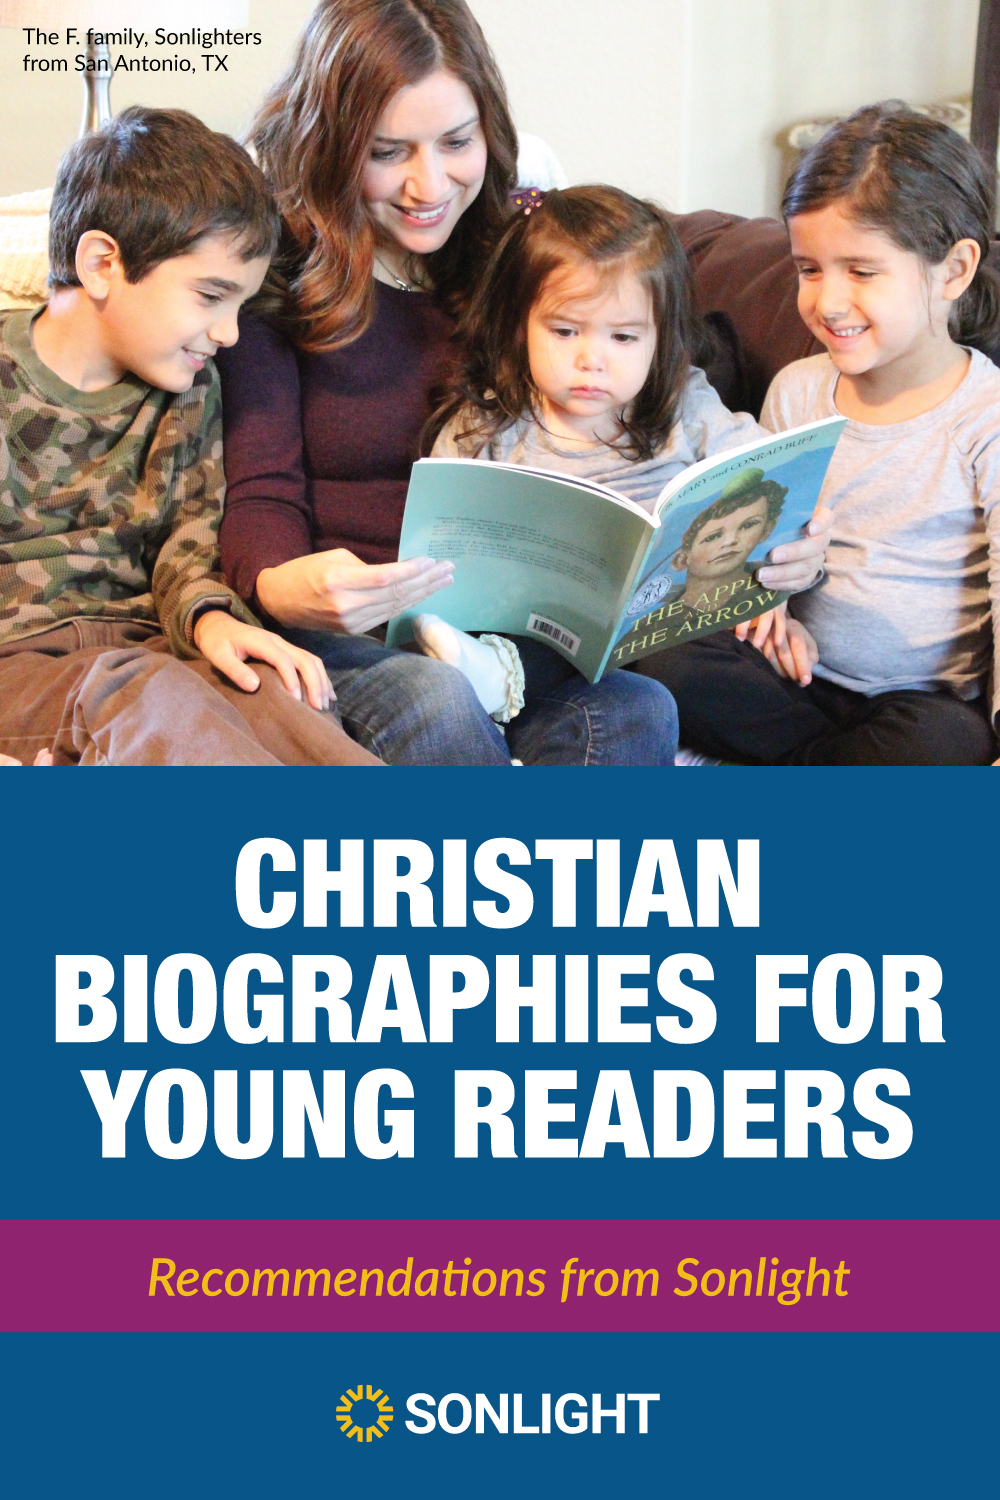 christian biography books 200 pages